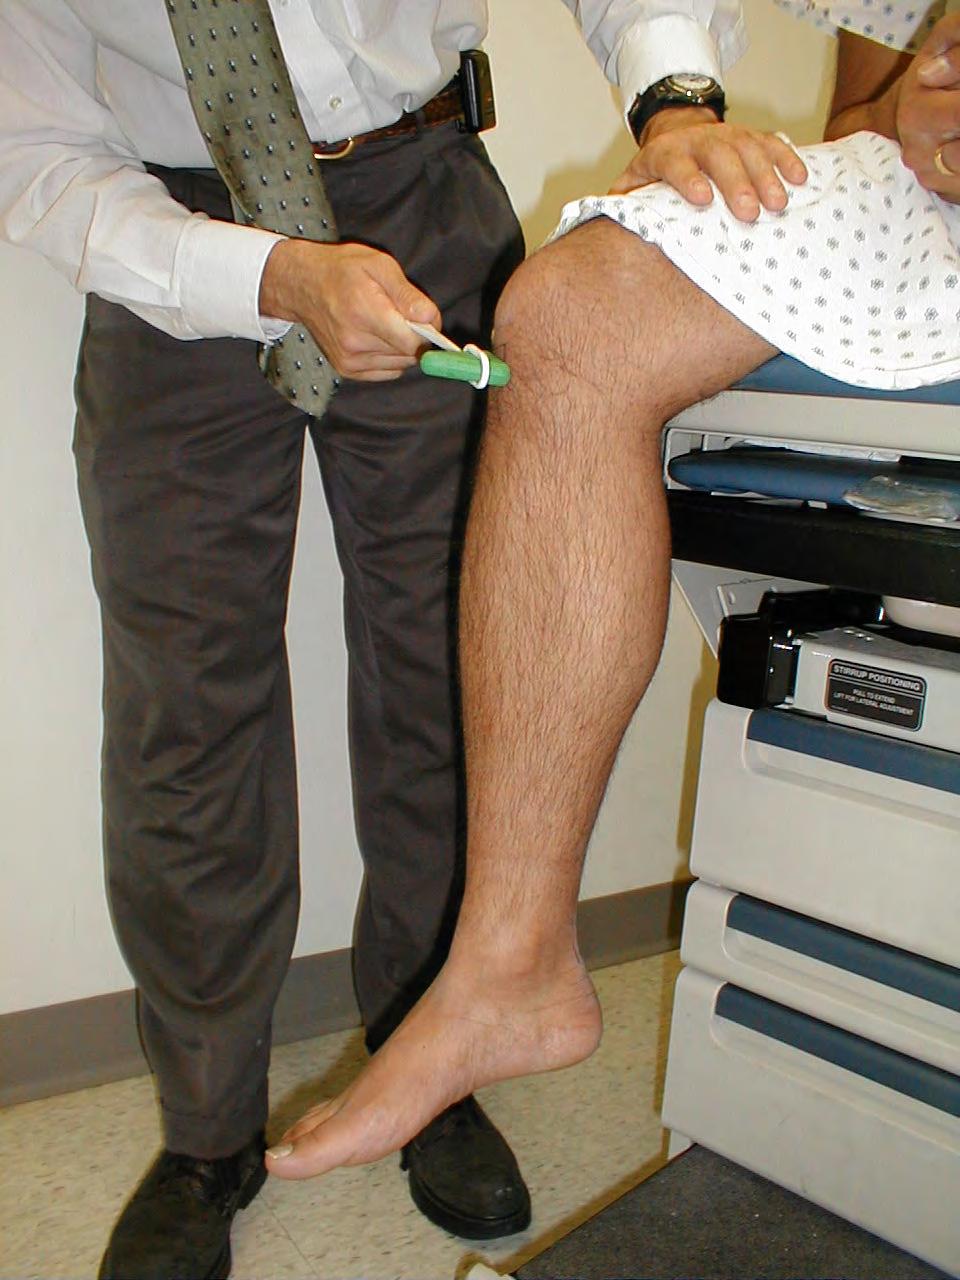 The doctor tested the patient s patellar reflex by